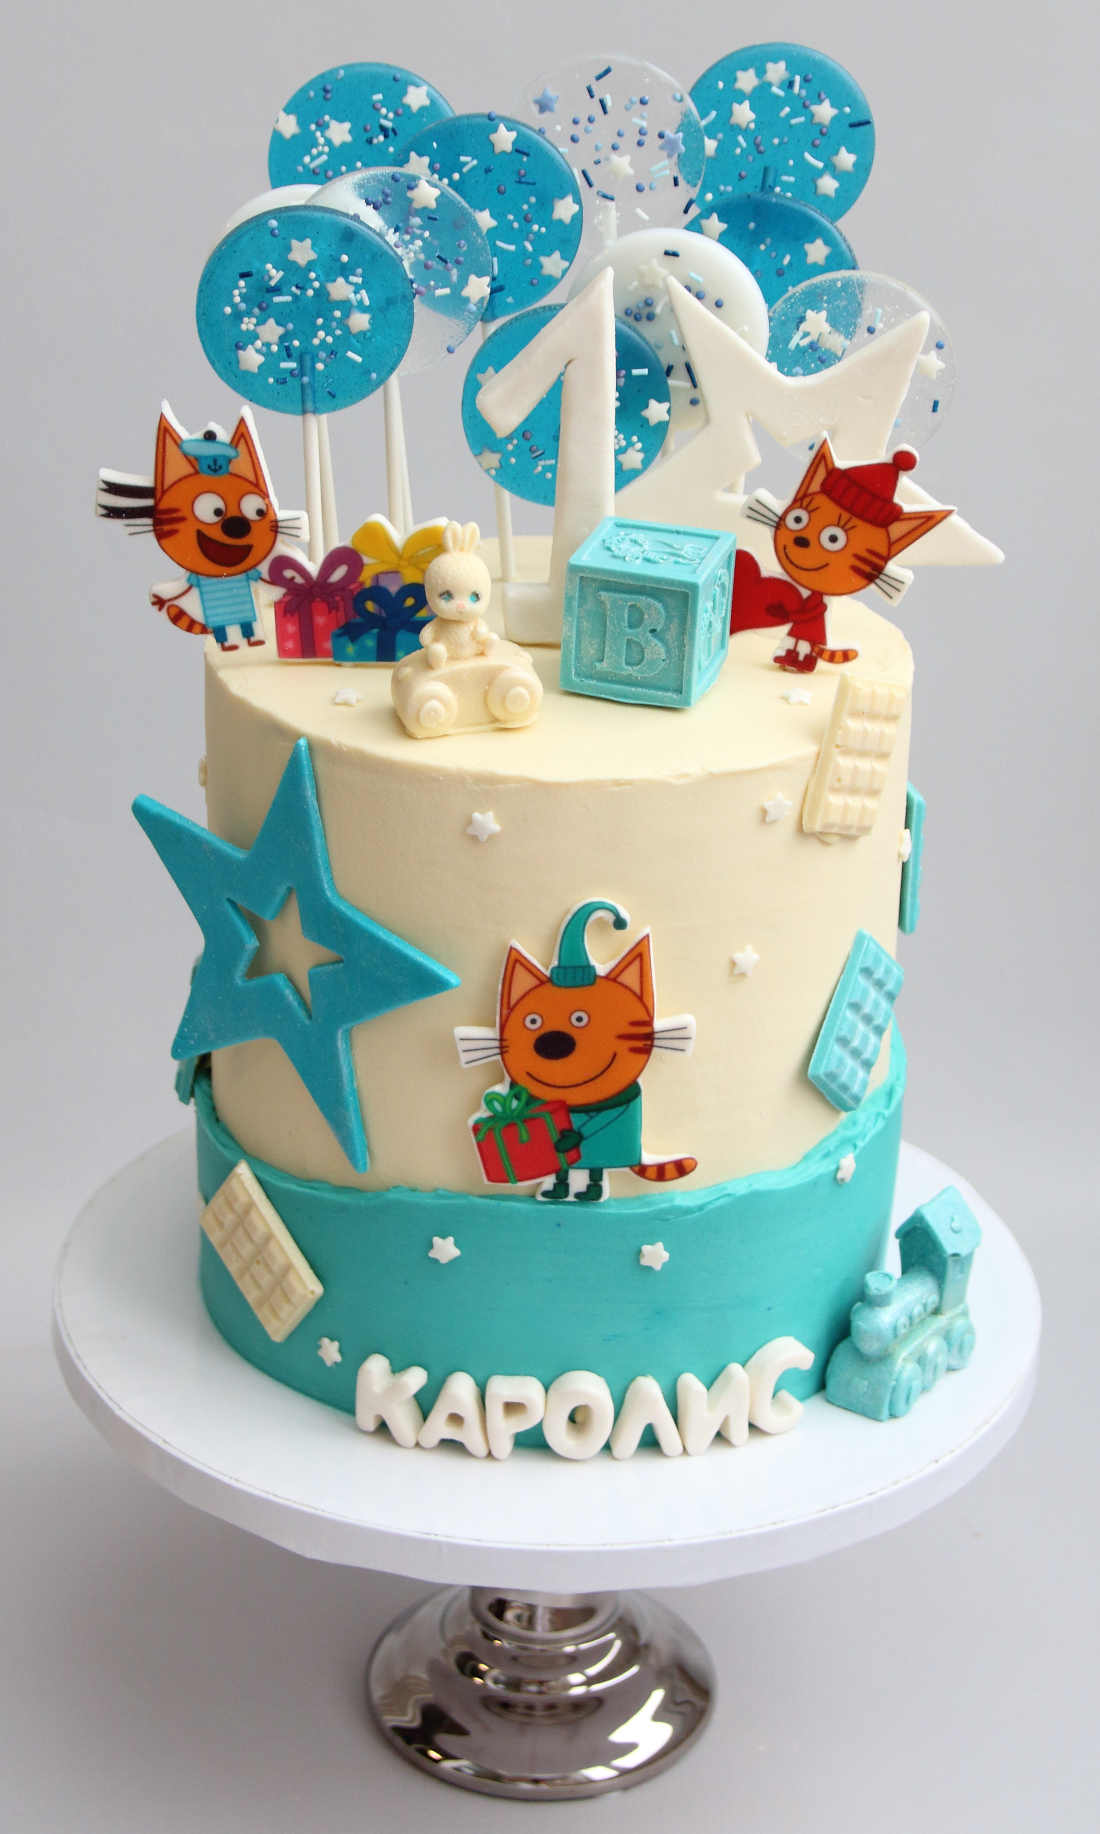 Kid-E-Cats cake with Cookie, Pudding and Candy